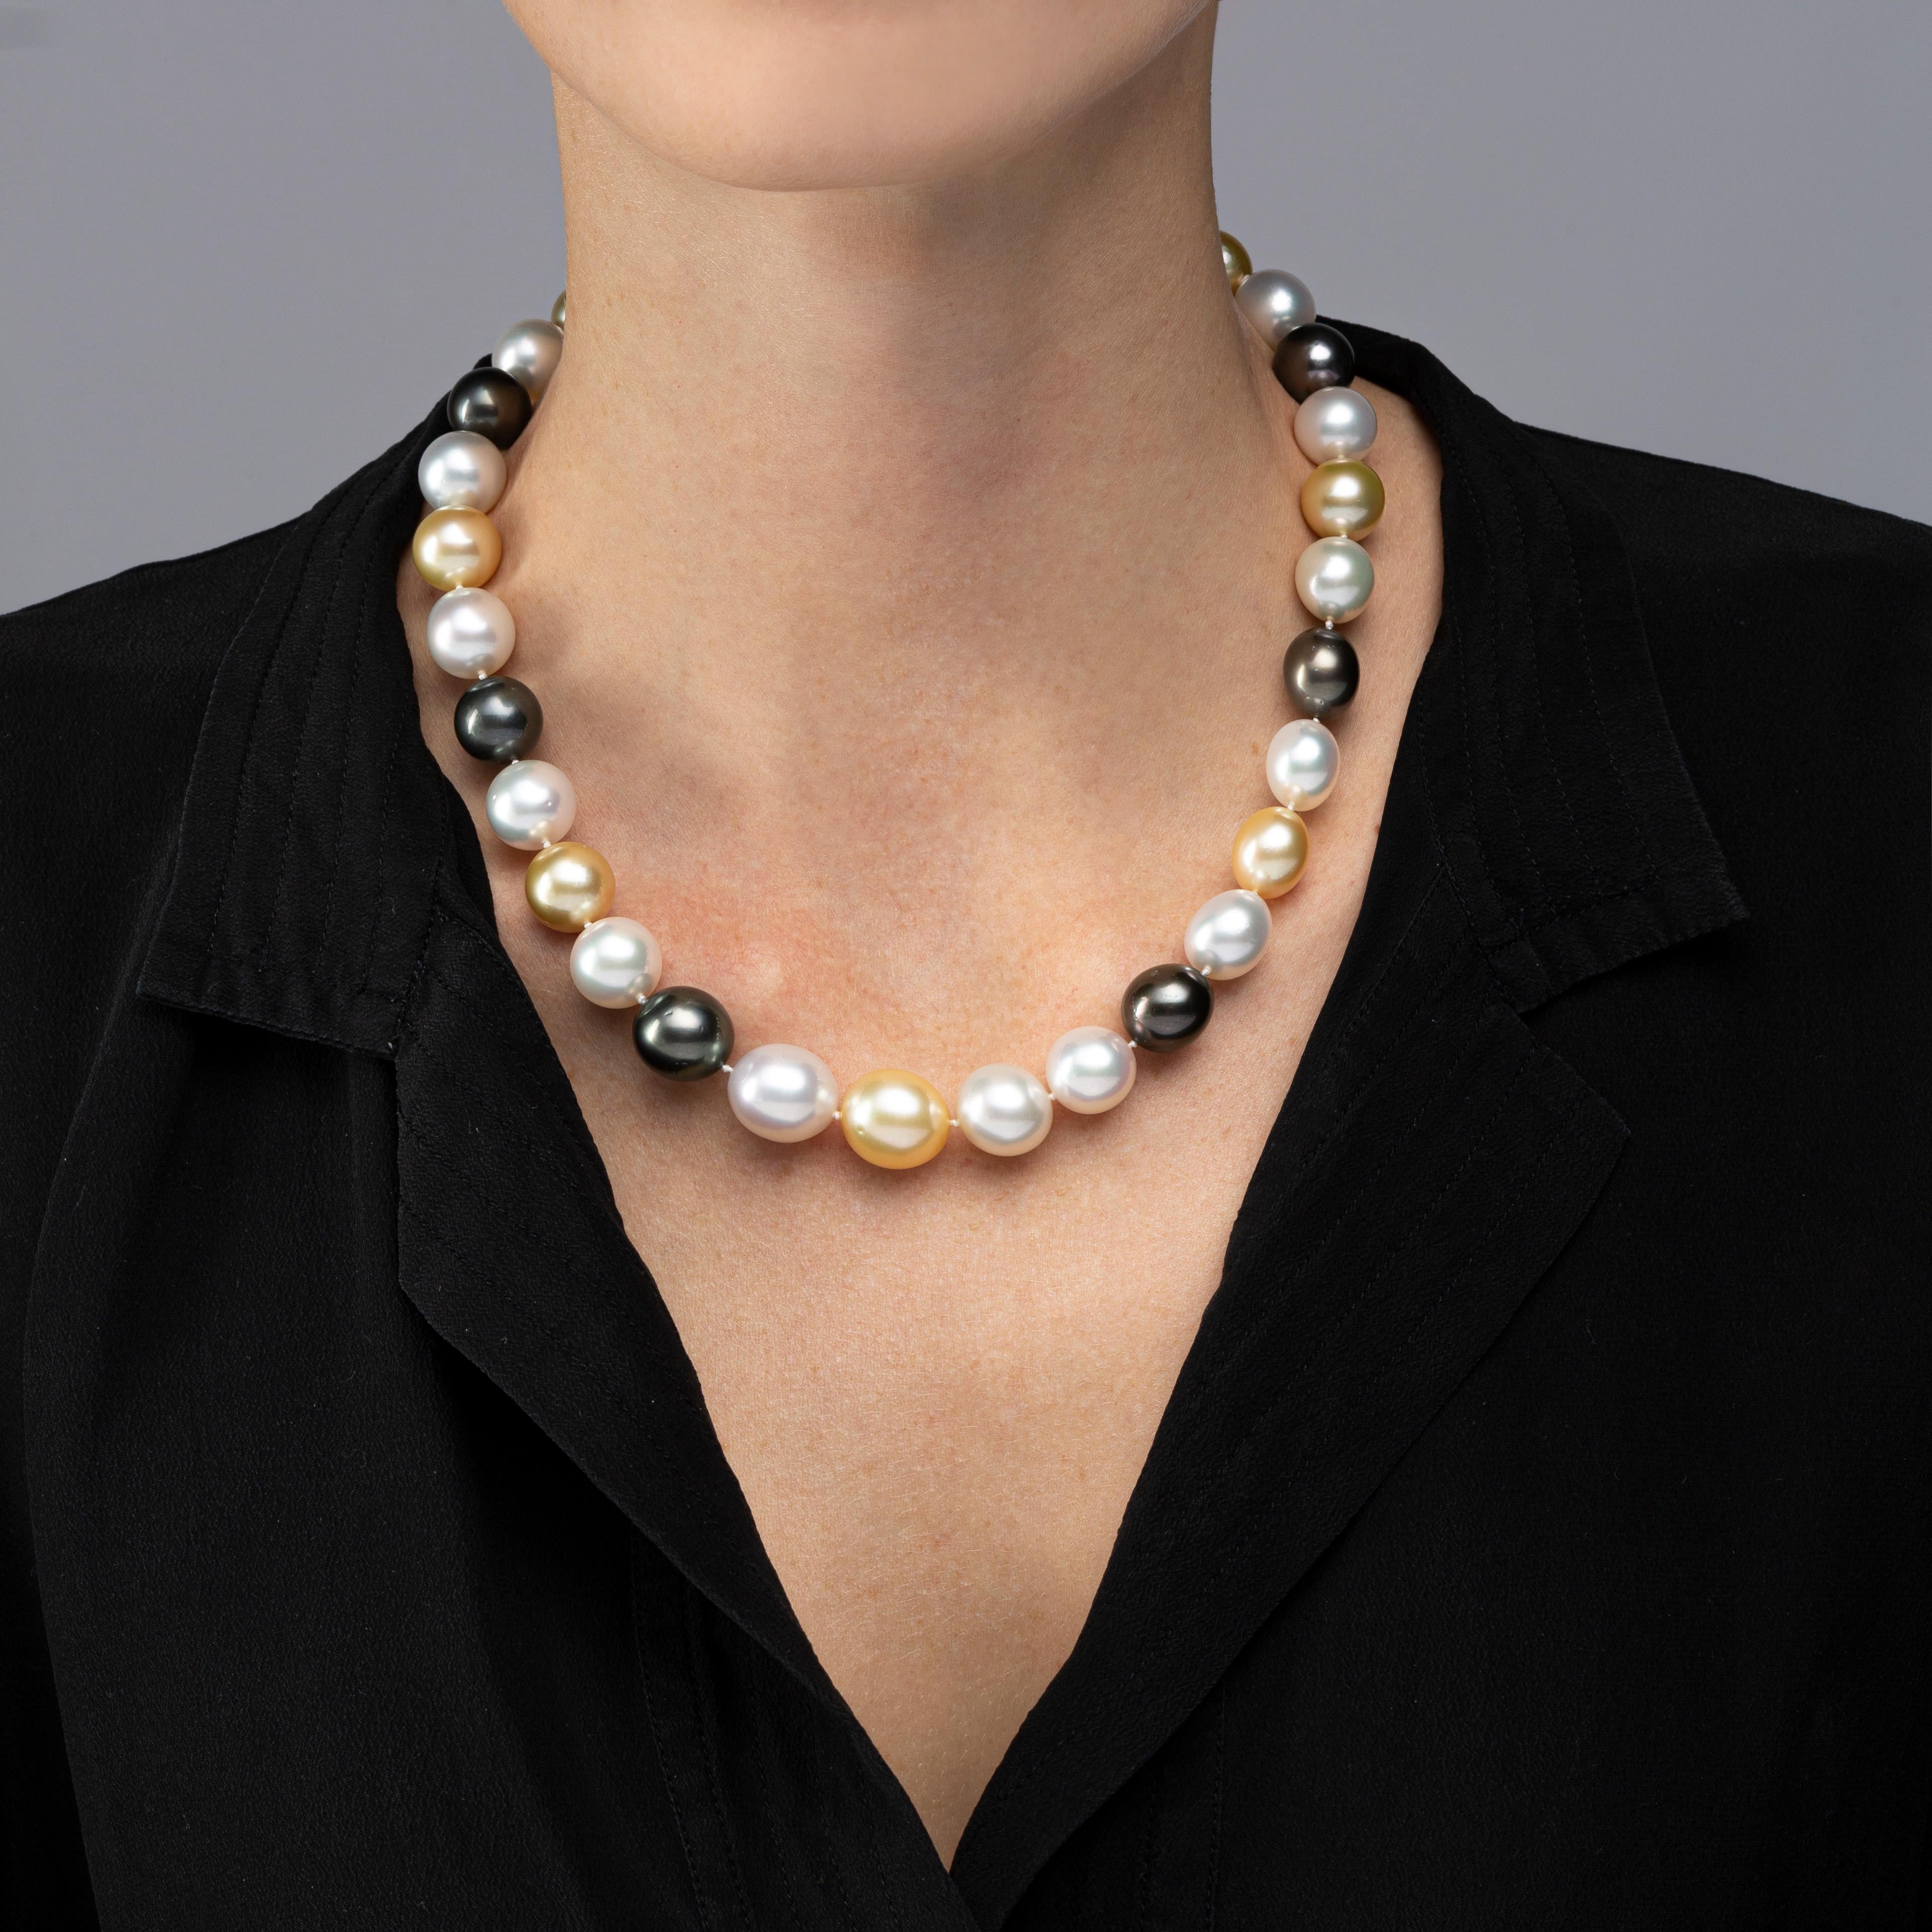 Alex Jona eighteen inch long necklace consisting of thirty three, 0.45 - 0.55 in. / 11.5-14.1mm, white, gold and black South Sea pearls, the pearls are strung with an invisible clasps. Pearl Quality: AA - Pearl Luster: AA
The Origin of the pearls